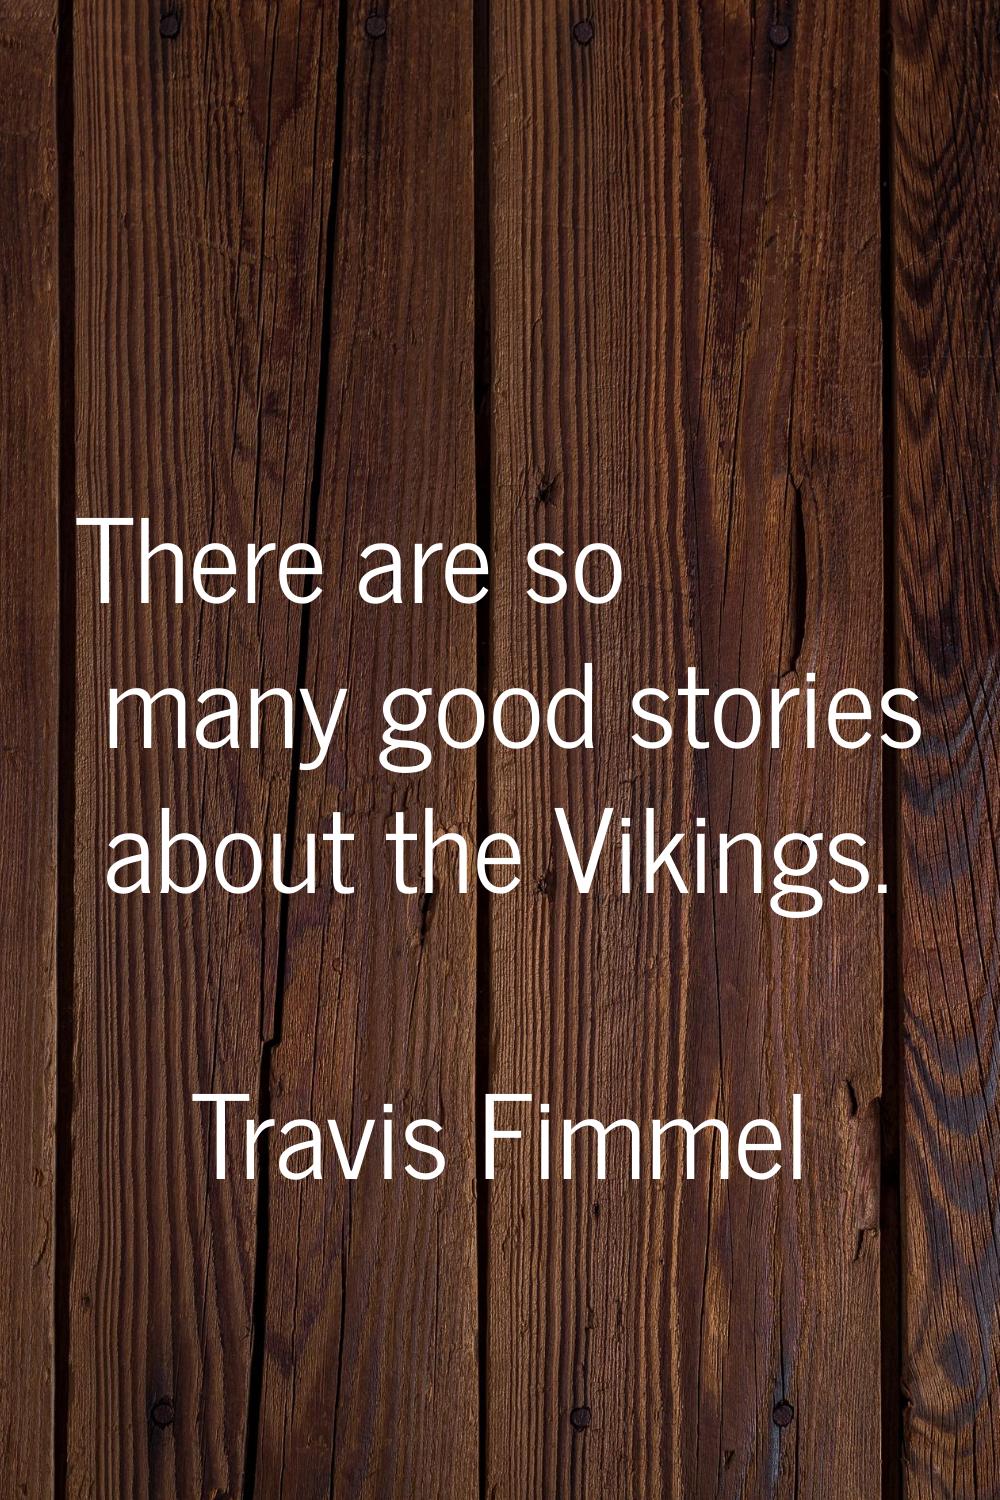 There are so many good stories about the Vikings.